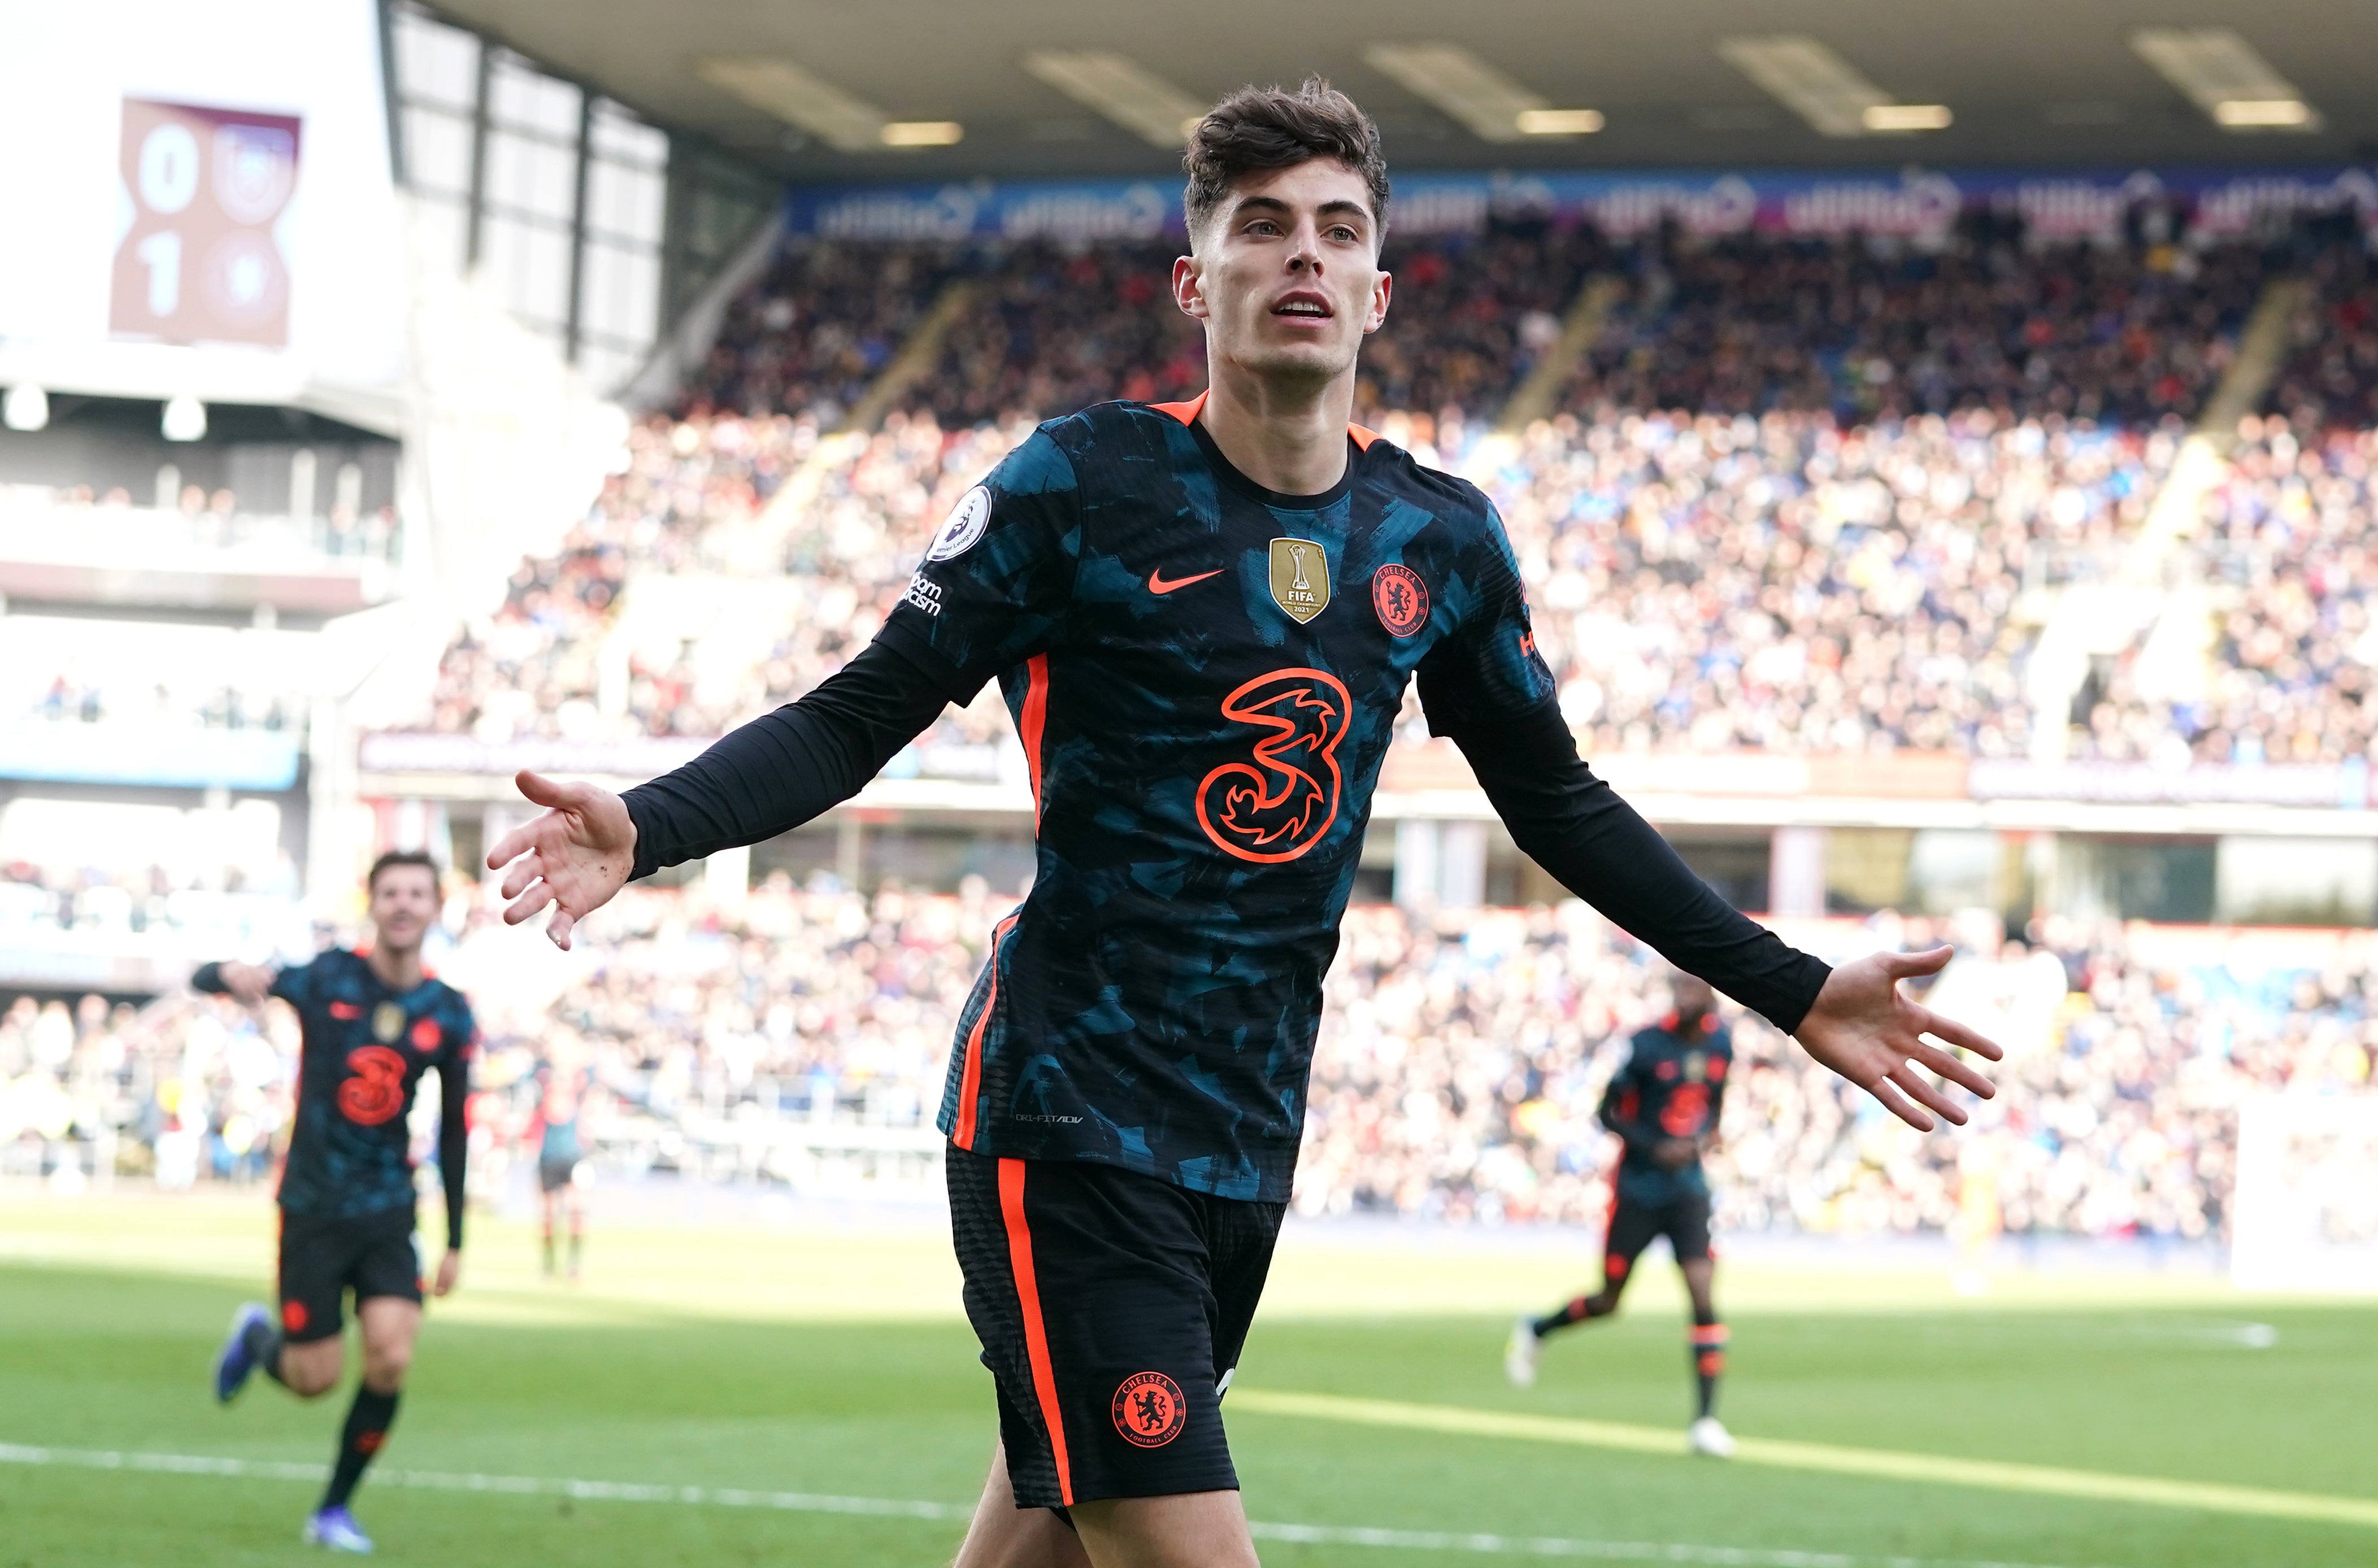 Havertz scored two in three minutes as Chelsea ripped through Burnley after the break